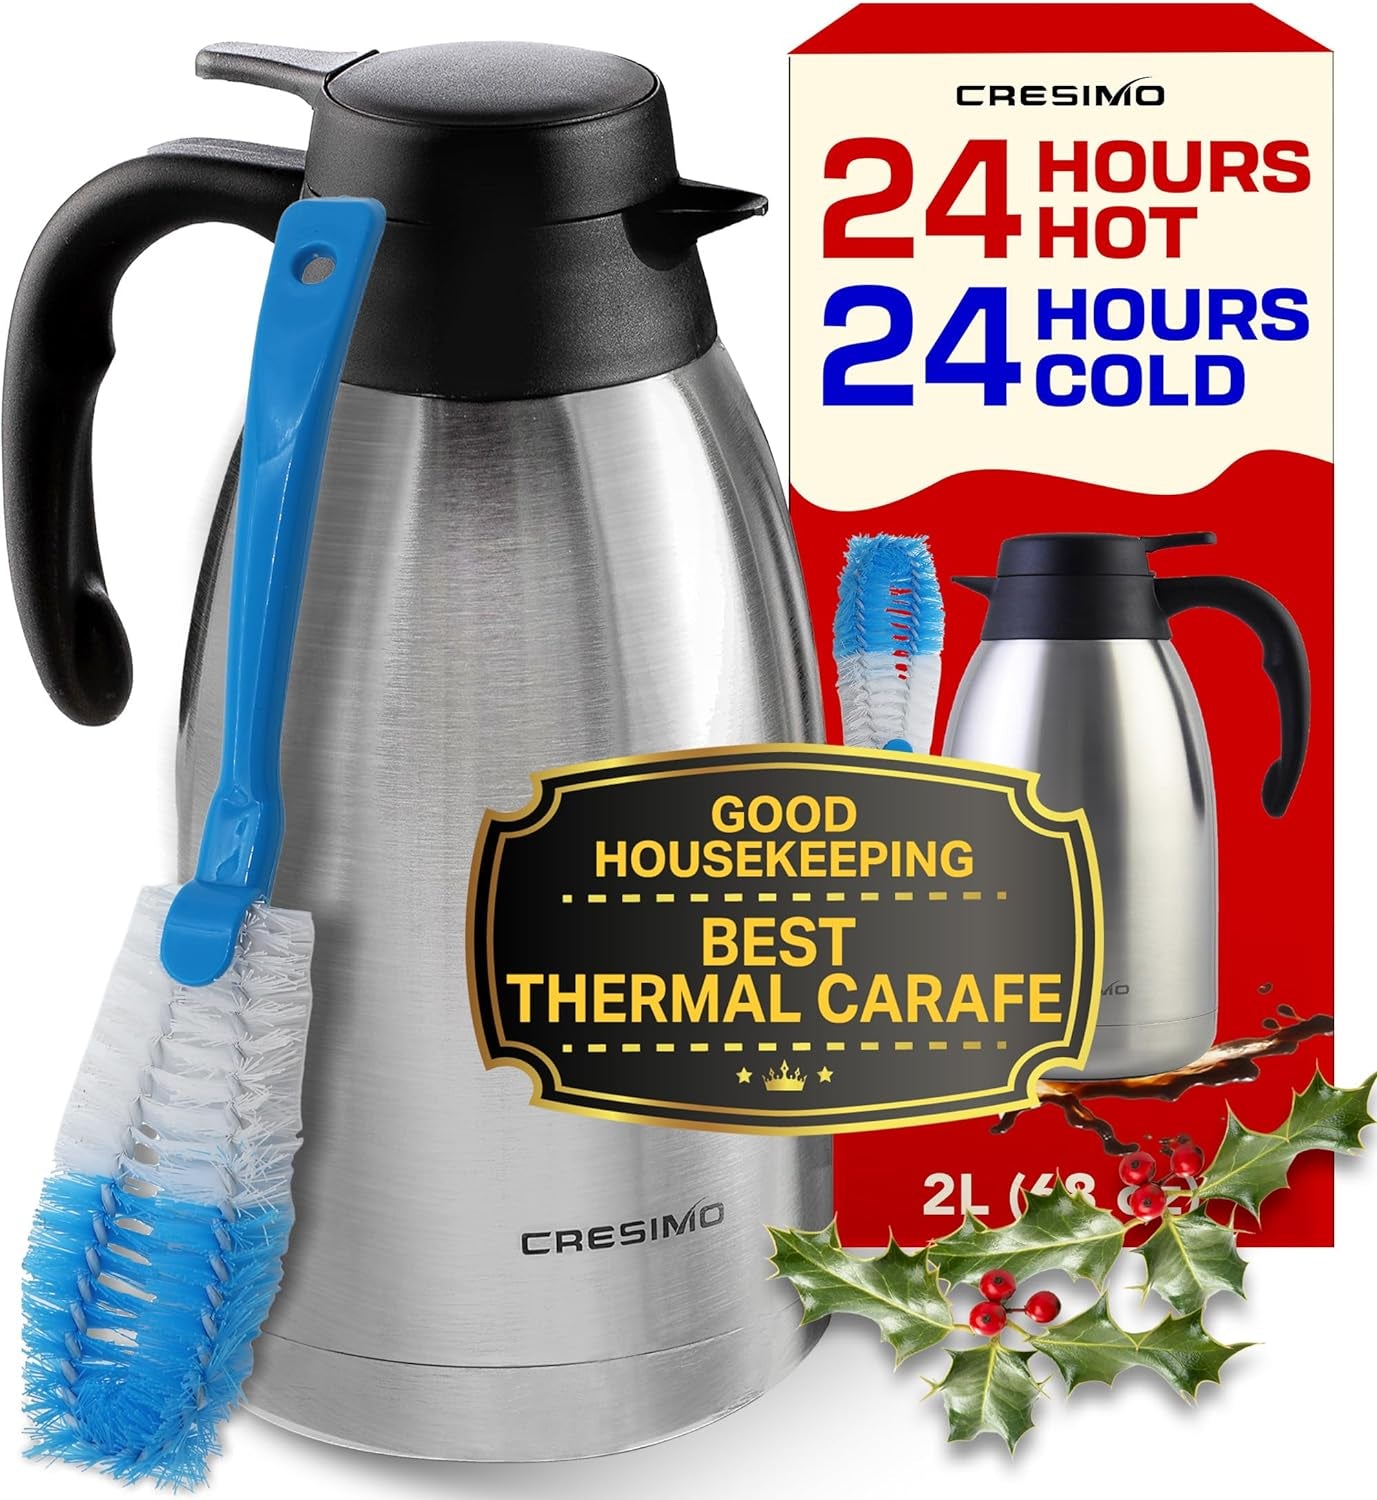 Thermal Coffee Carafe 68oz / 2L-12 Hours Hot Water Dispenser, Insulated  Stainless Steel Double Walled Vacuum Flask - Coffee Carafes For Keeping Hot  Beverage Dispenser, Coffee Dispenser & Tea Dispenser